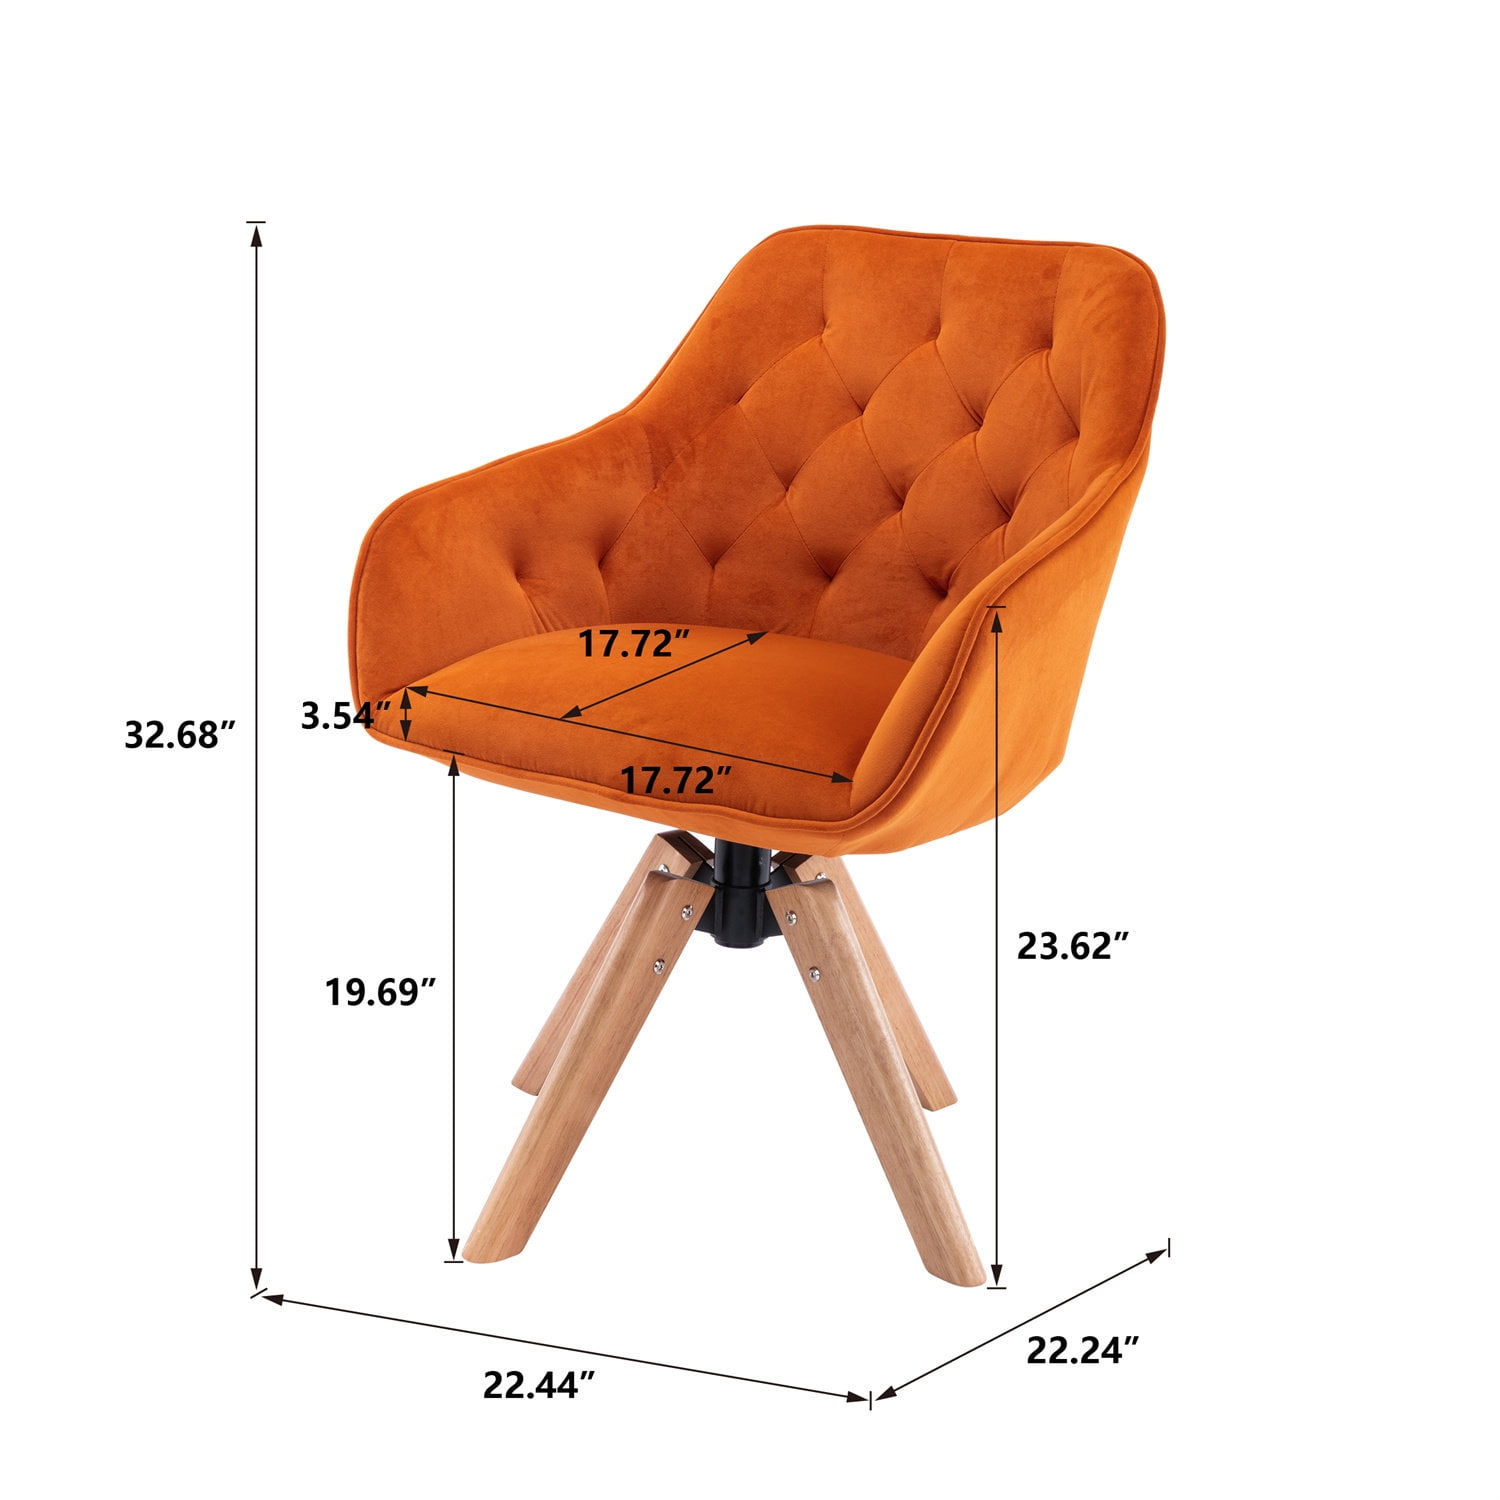  YOUTASTE Office Chair Modern Armless Desk Chair, Height  Adjustable Swivel Rocking Computer Task Chair, Faux Leather Sewing Chair  with Wheels, Stylish Lounge Vanity Chair, Orange : Home & Kitchen